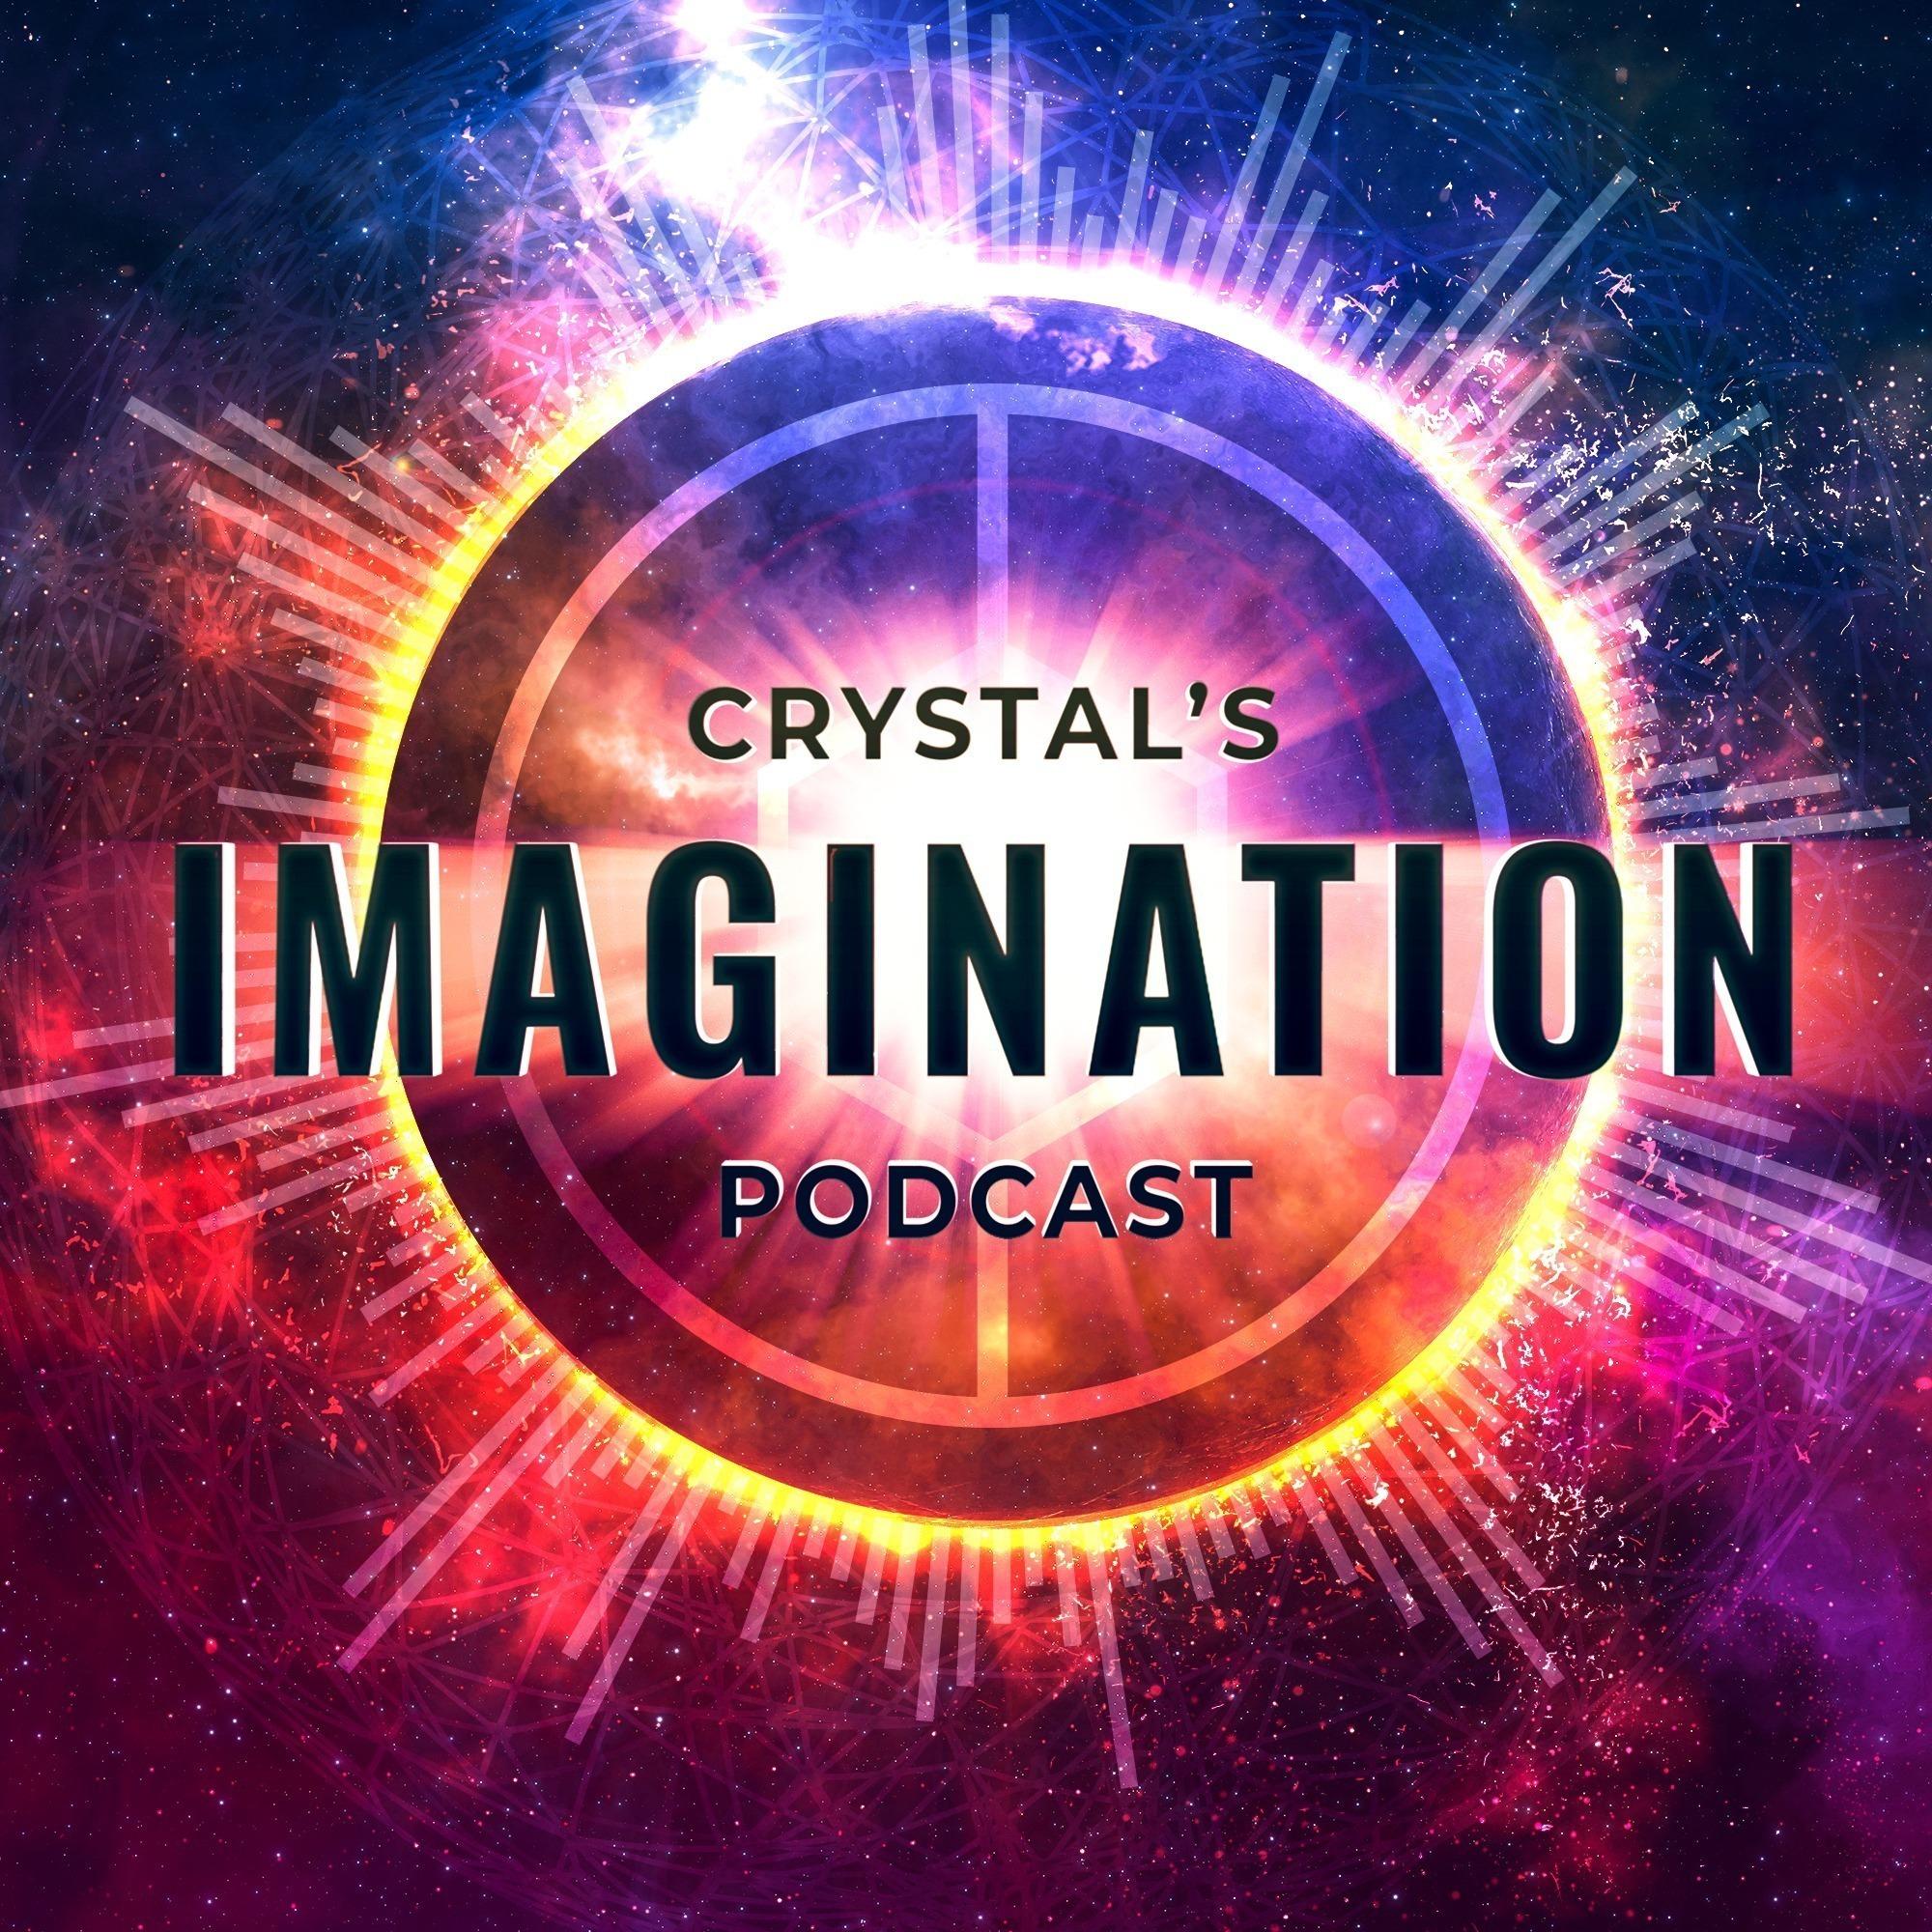 Crystal's Imagination Podcast